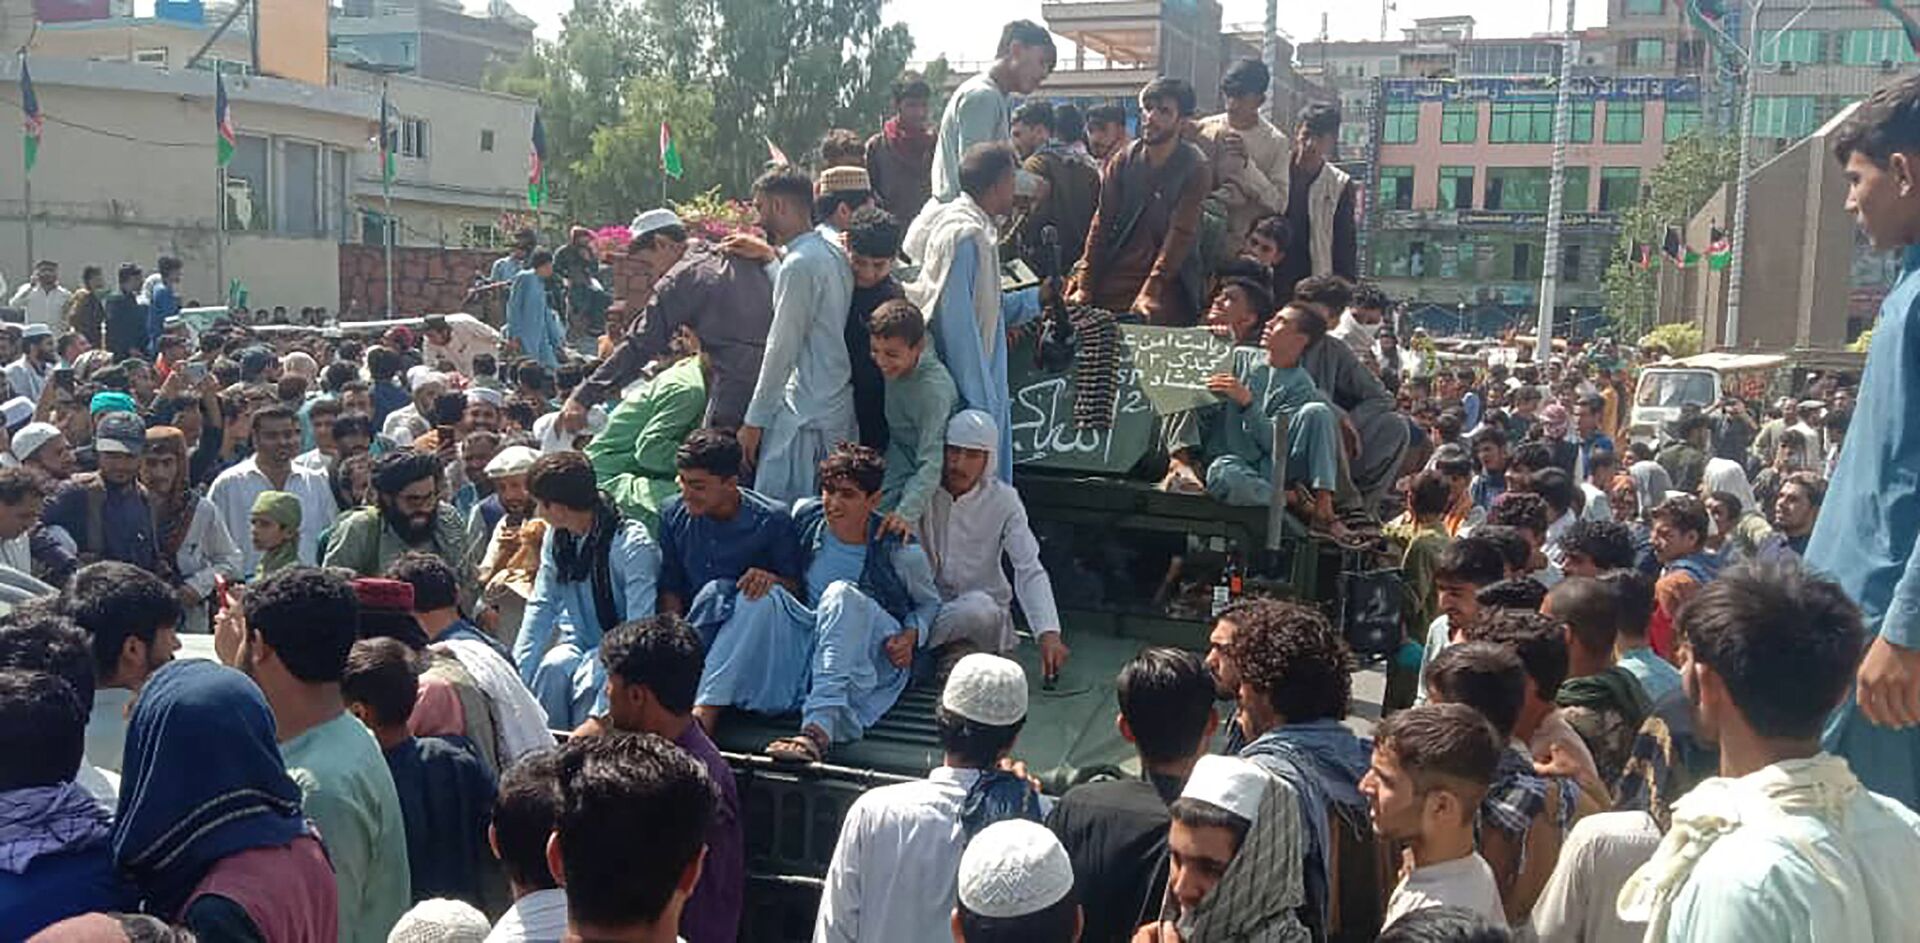 Taliban fighters and local people sit on an Afghan National Army (ANA) Humvee vehicle on a street in Jalalabad province on August 15, 2021.  - Sputnik International, 1920, 07.09.2021